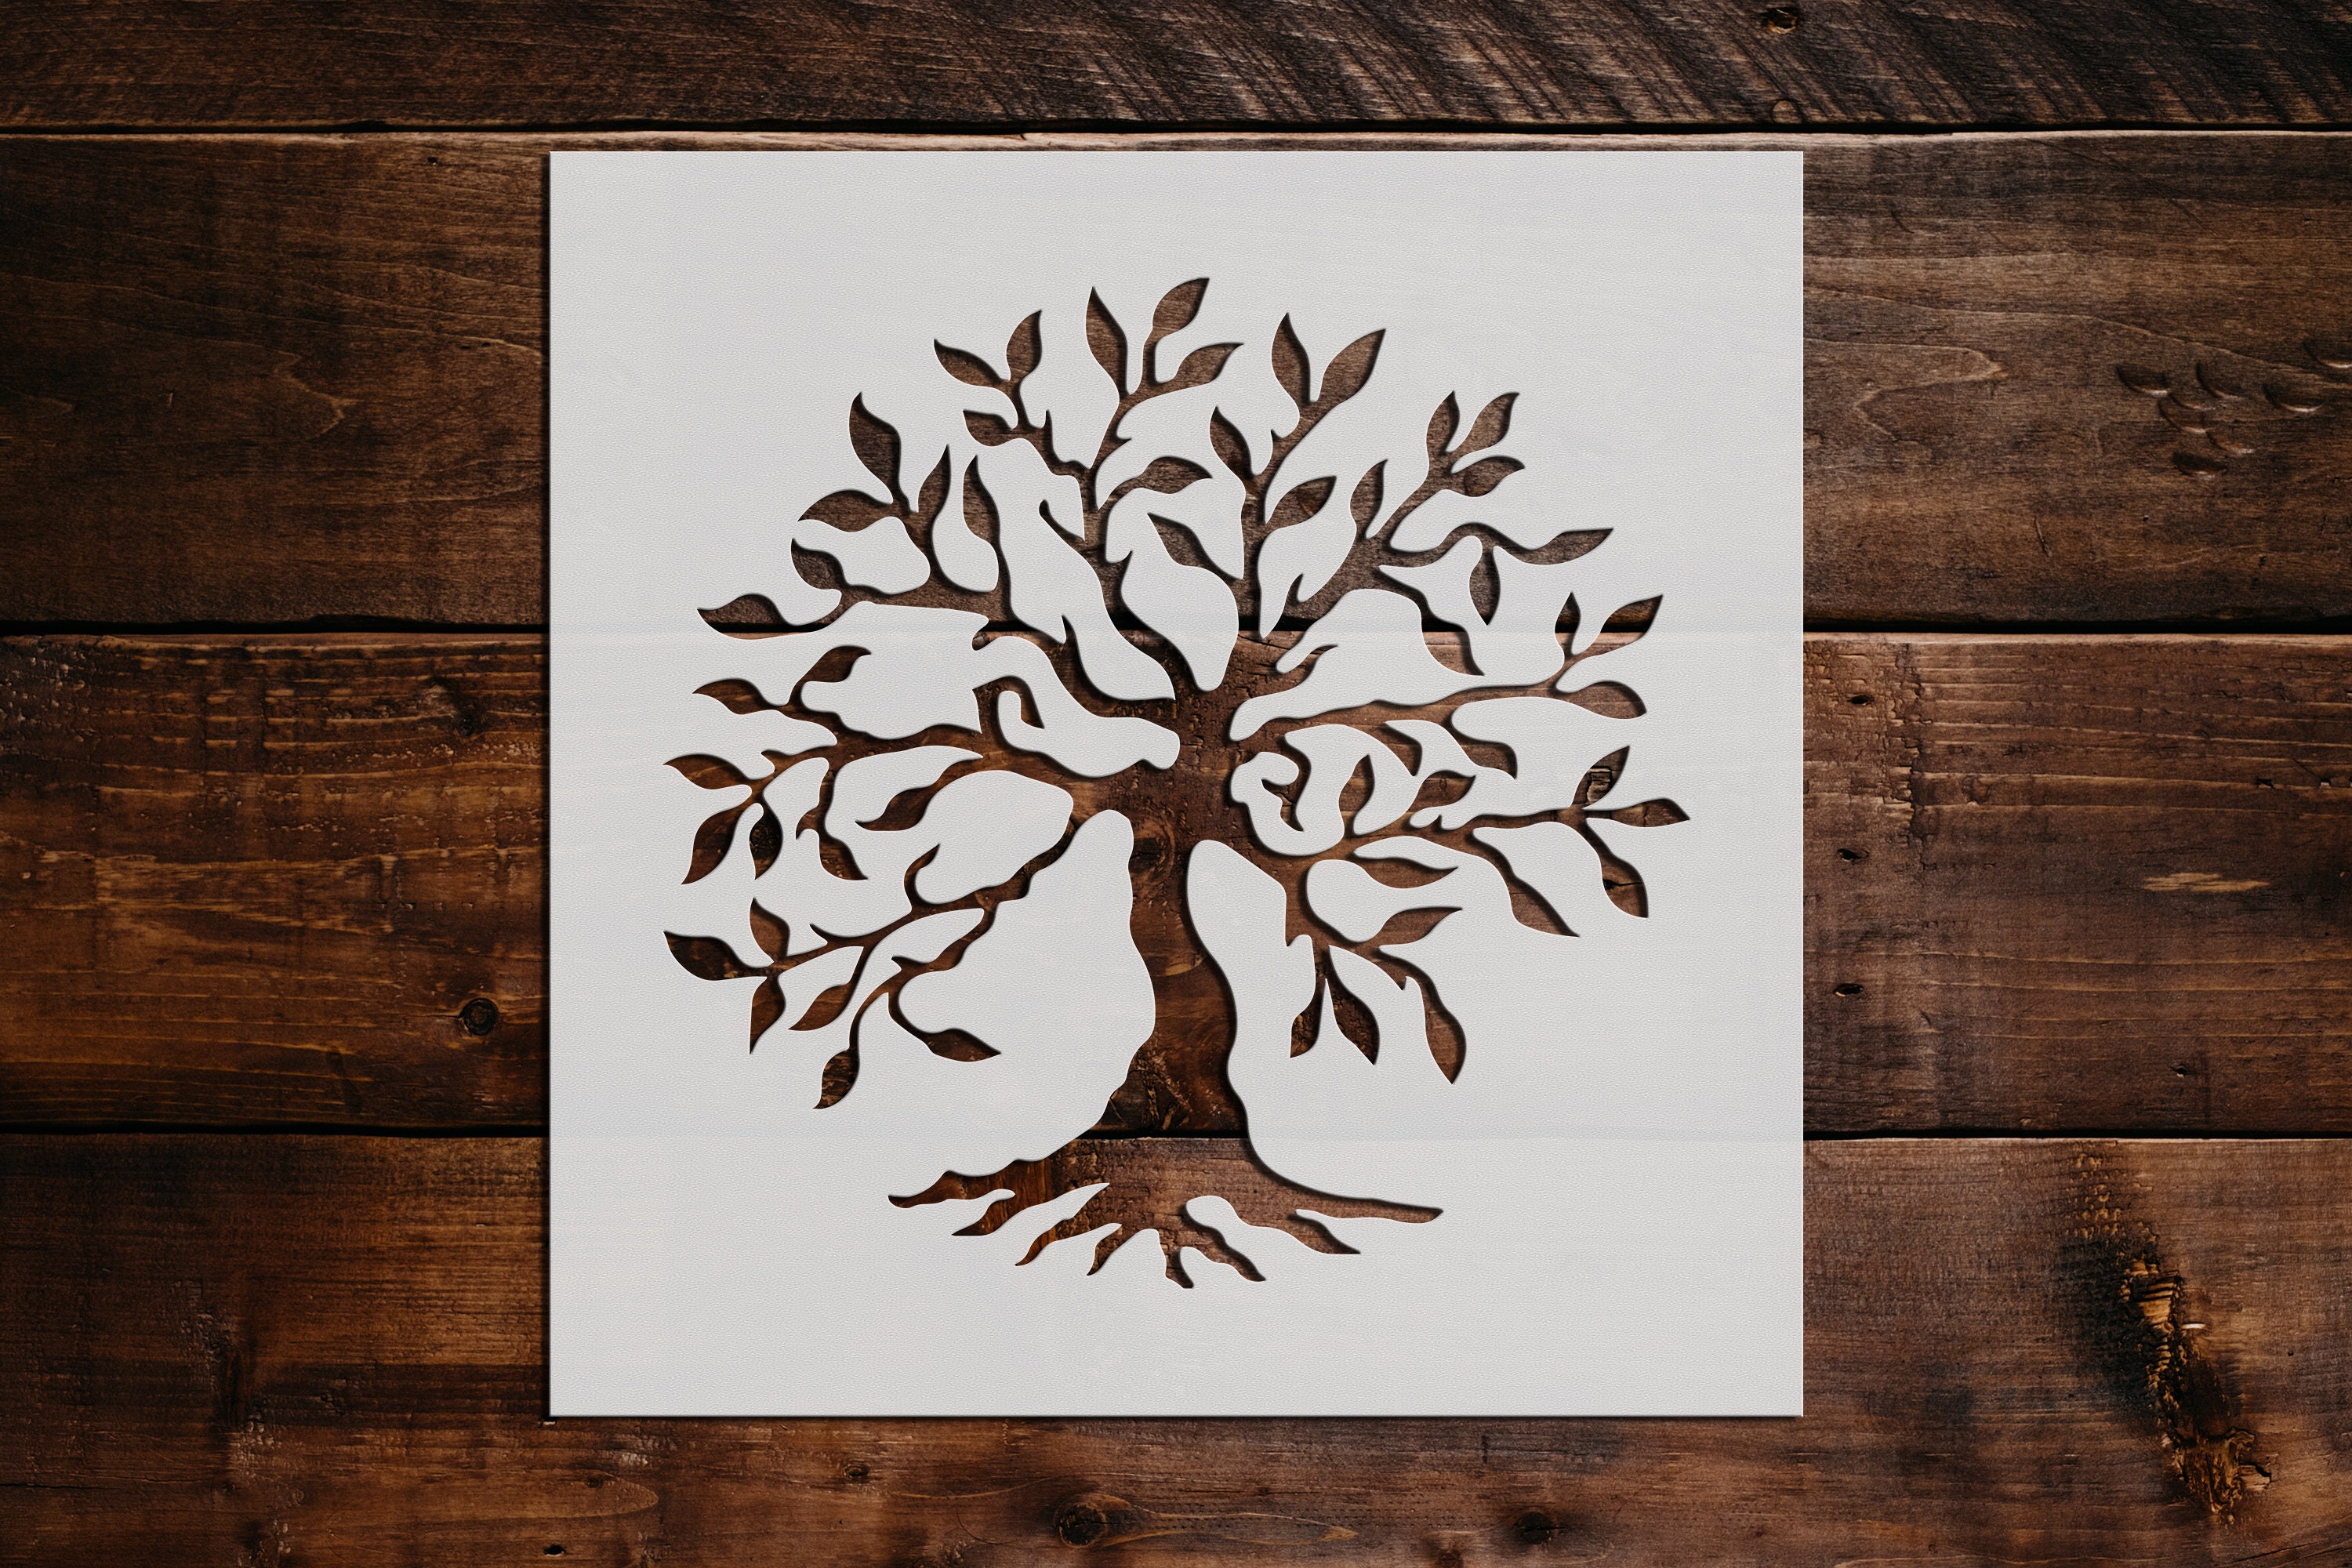 Pine Trees Stencil - Reusable Stencils for Wall Art, Home Décor, Painting,  Art & Craft, Size options - A4, A3, A2